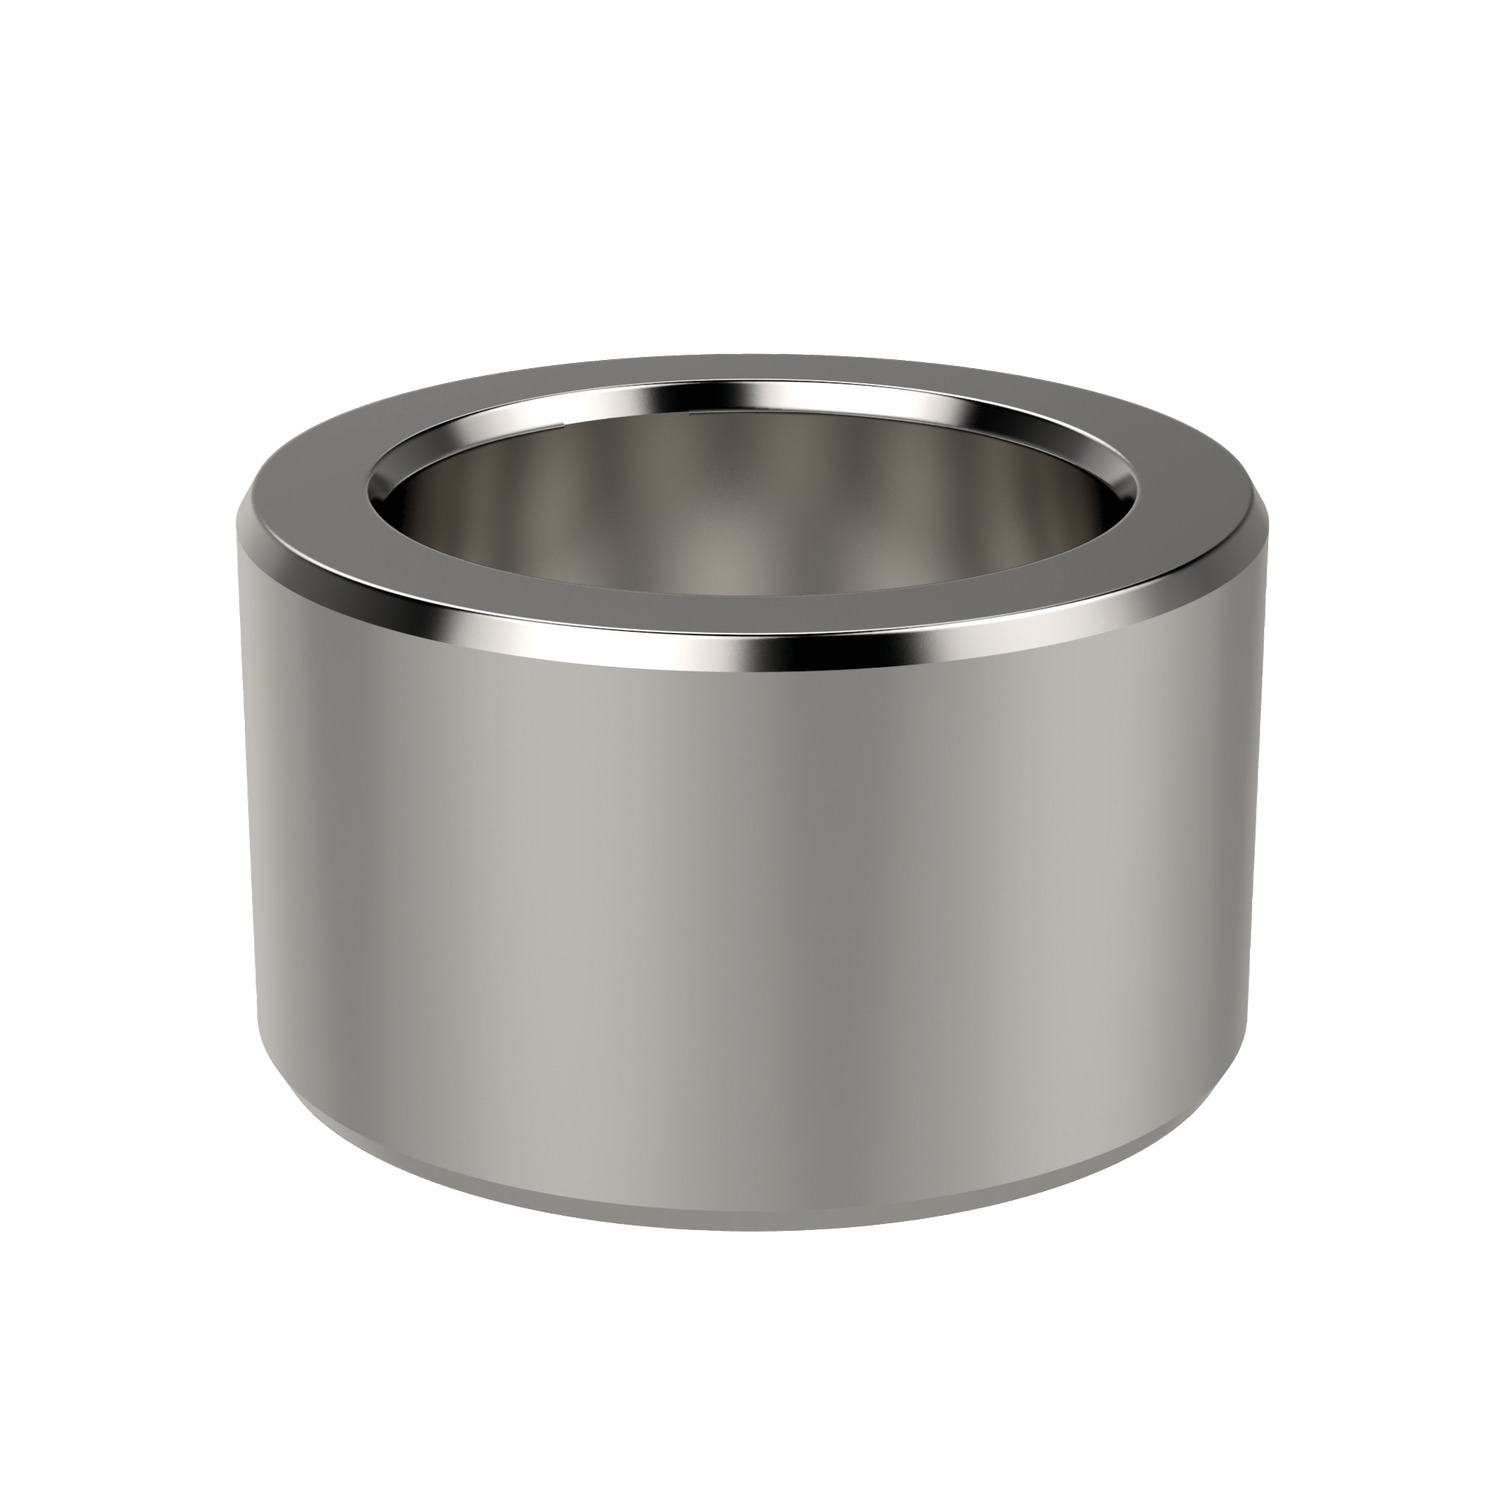 Bushings Bushings for use with our clamping pins, available in heat-treated, stainless or precipitation-hardened steel.